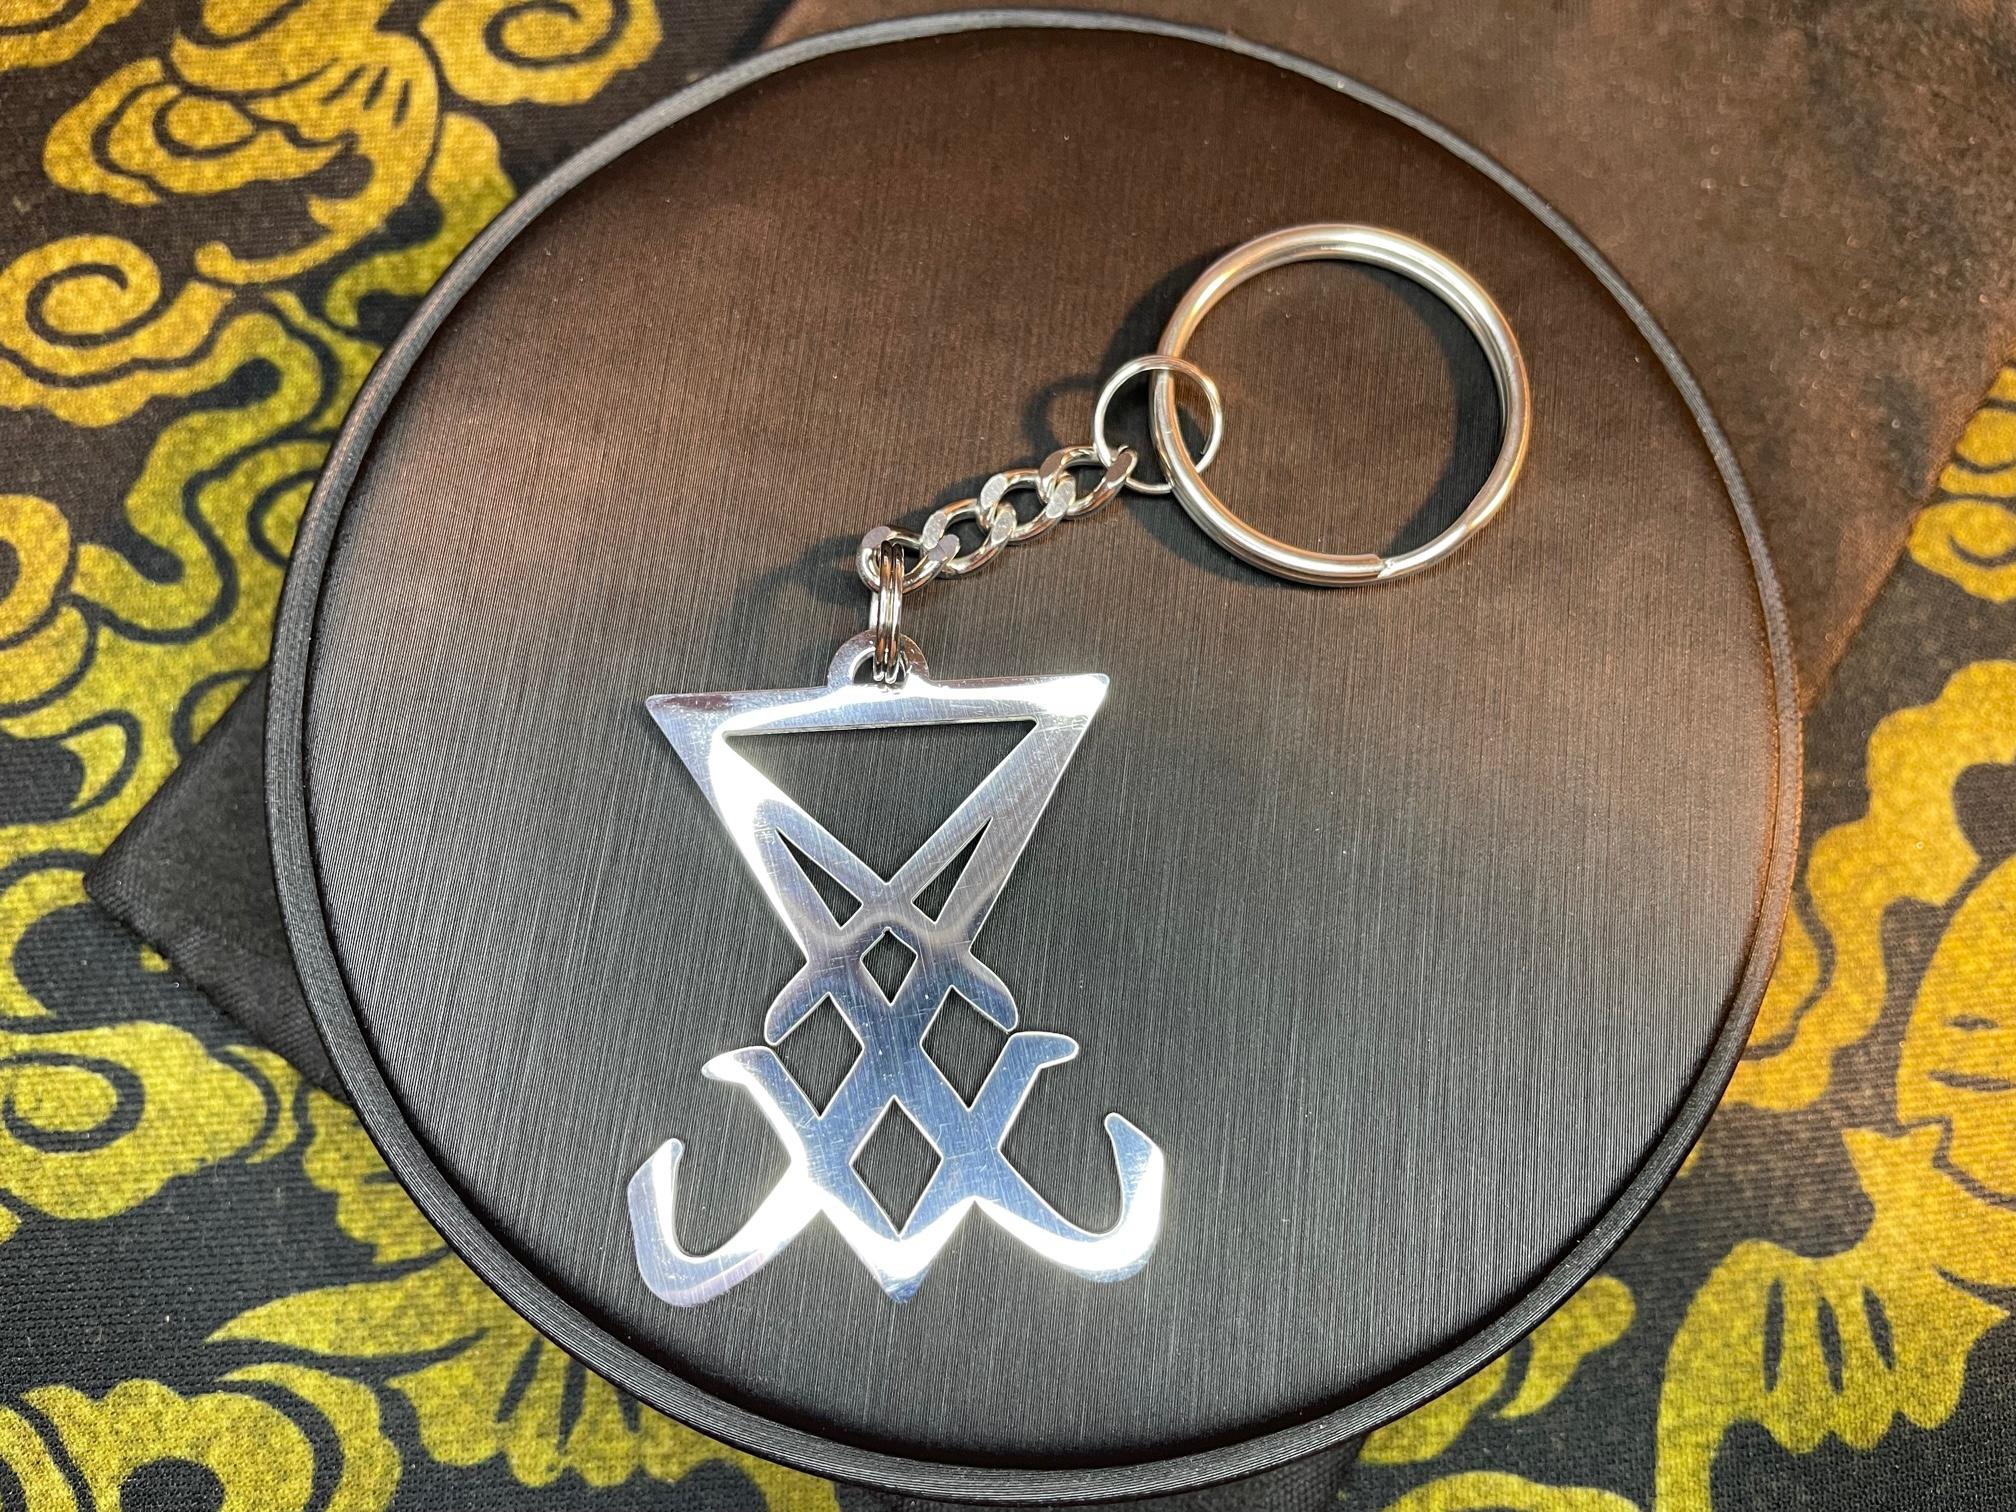 sigil of lucifer baphomet pentagram stainless steel keychain church of satan lavey satanic wiccan occult darkness jewelry